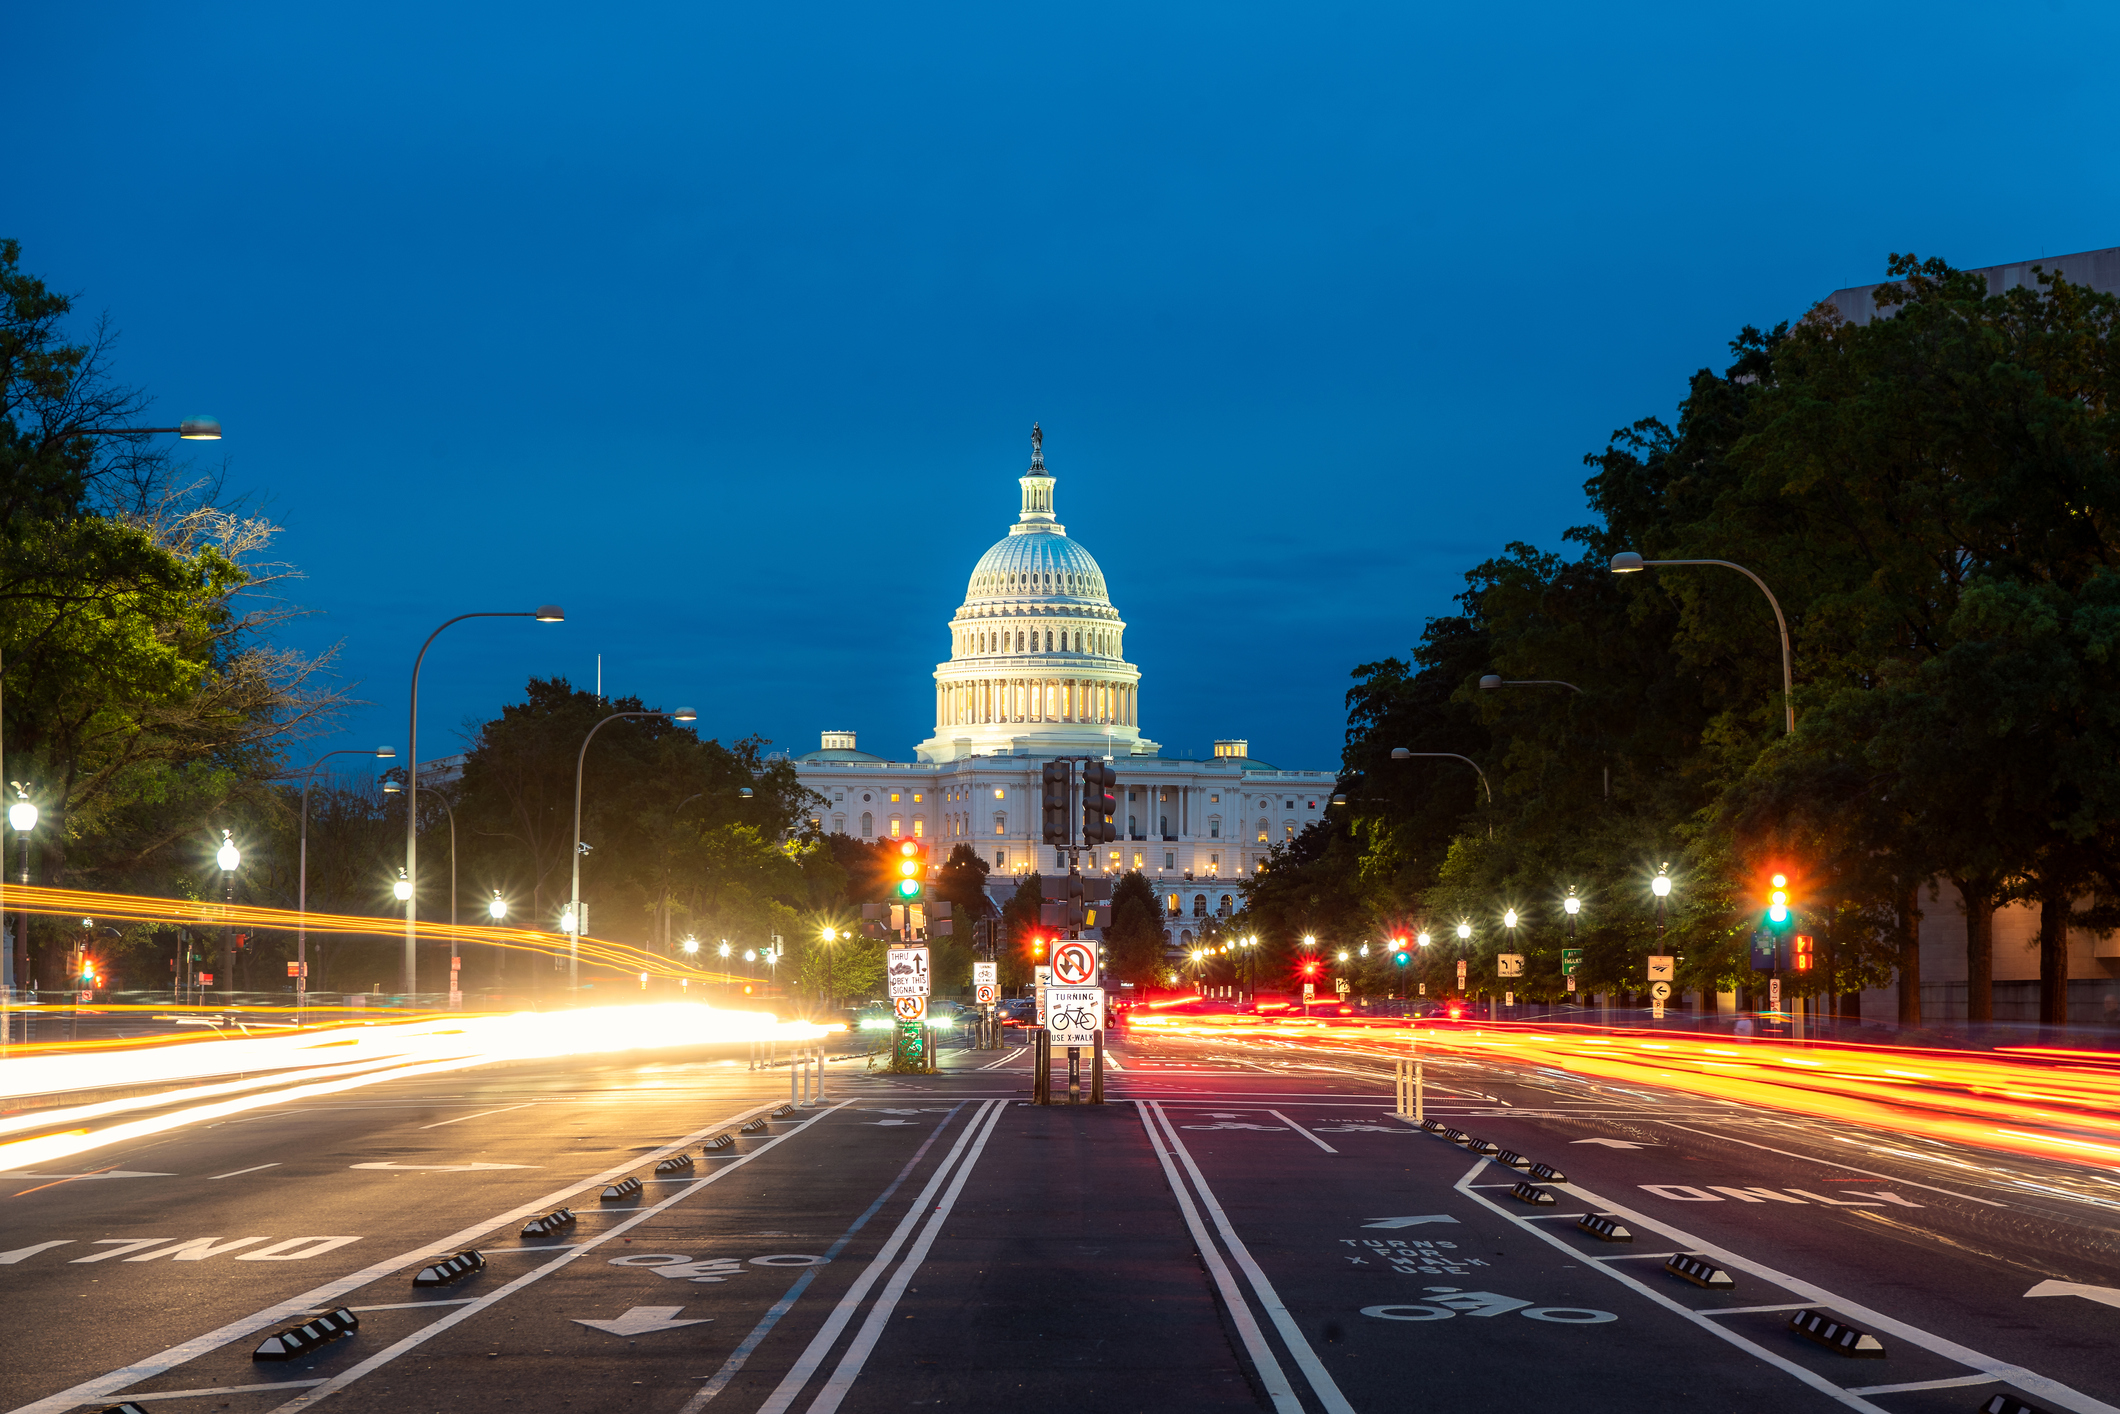 The United States Capitol building at night in Washington DC, USA.